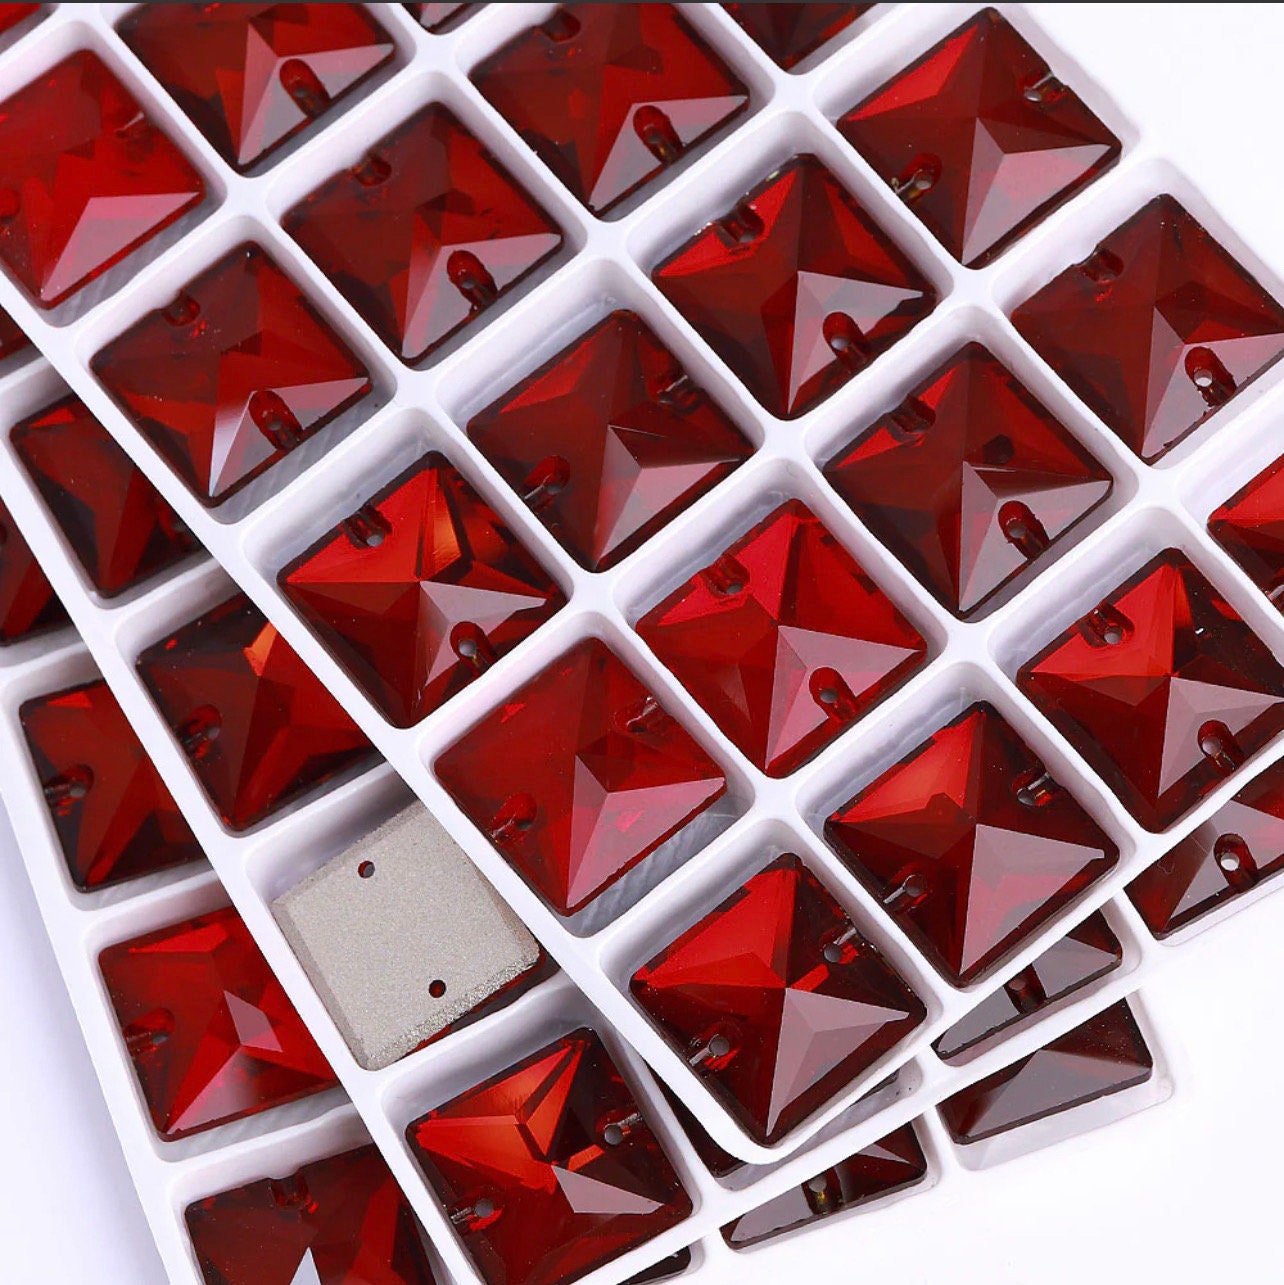 Sew on Rhinestones, 180pcs Red Rhinestones Mix Shapes Sew on Glass  Rhinestone Gems with Prongsfor Crafts, Clothes, Costume, Shoes, Dresses(red)